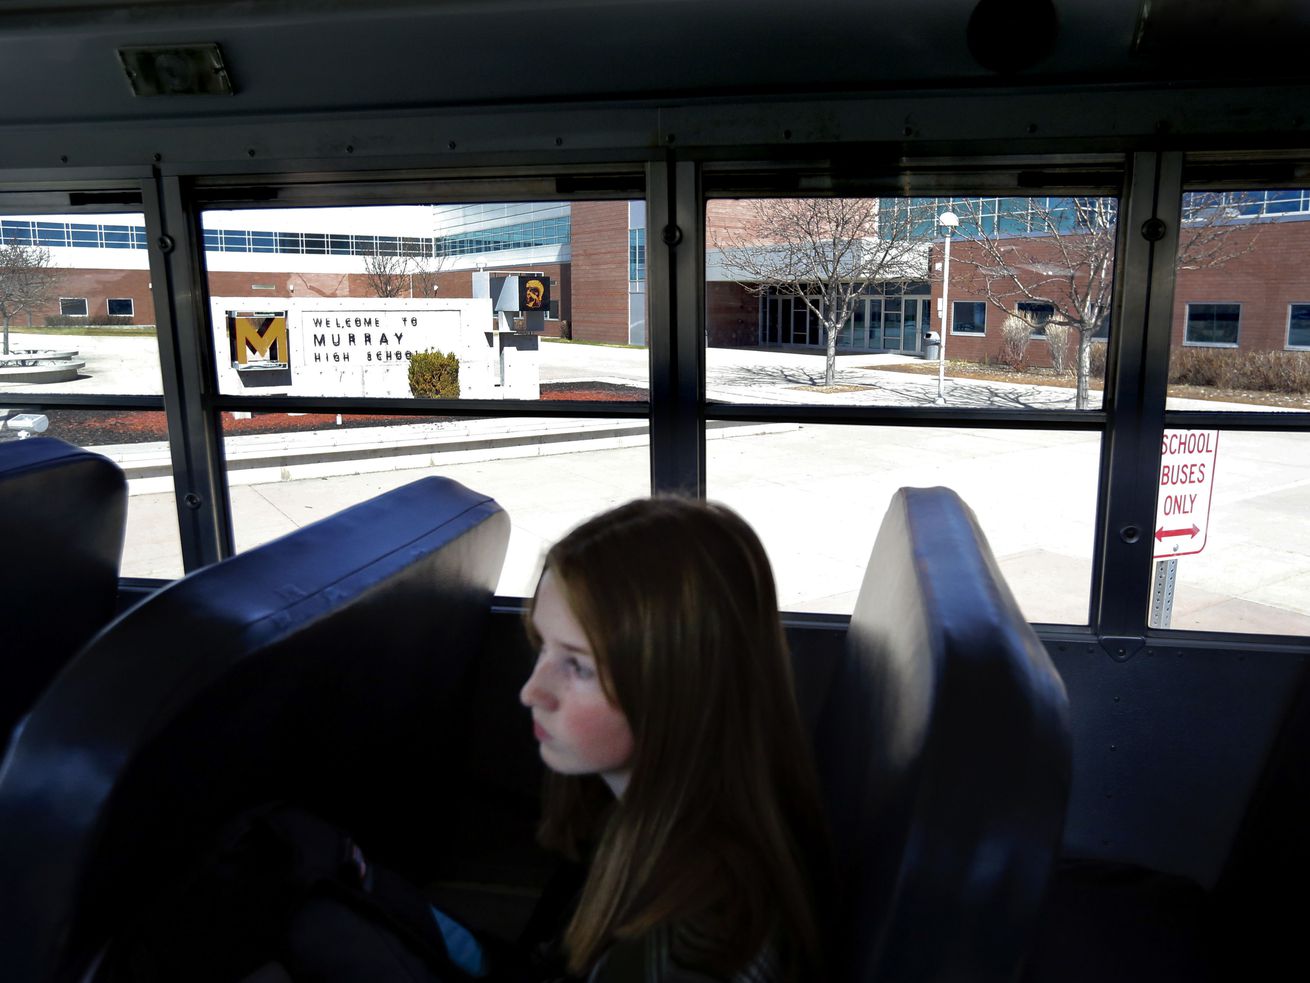 Sophomore Zoe Scott waits for her bus to leave Murray High School on Thursday, March 12, 2020. Murray City School District announced Thursday it is closing its schools until further notice amid spread of the novel coronavirus in Utah. Most students and teachers left school after the announcement was made earlier in the day.